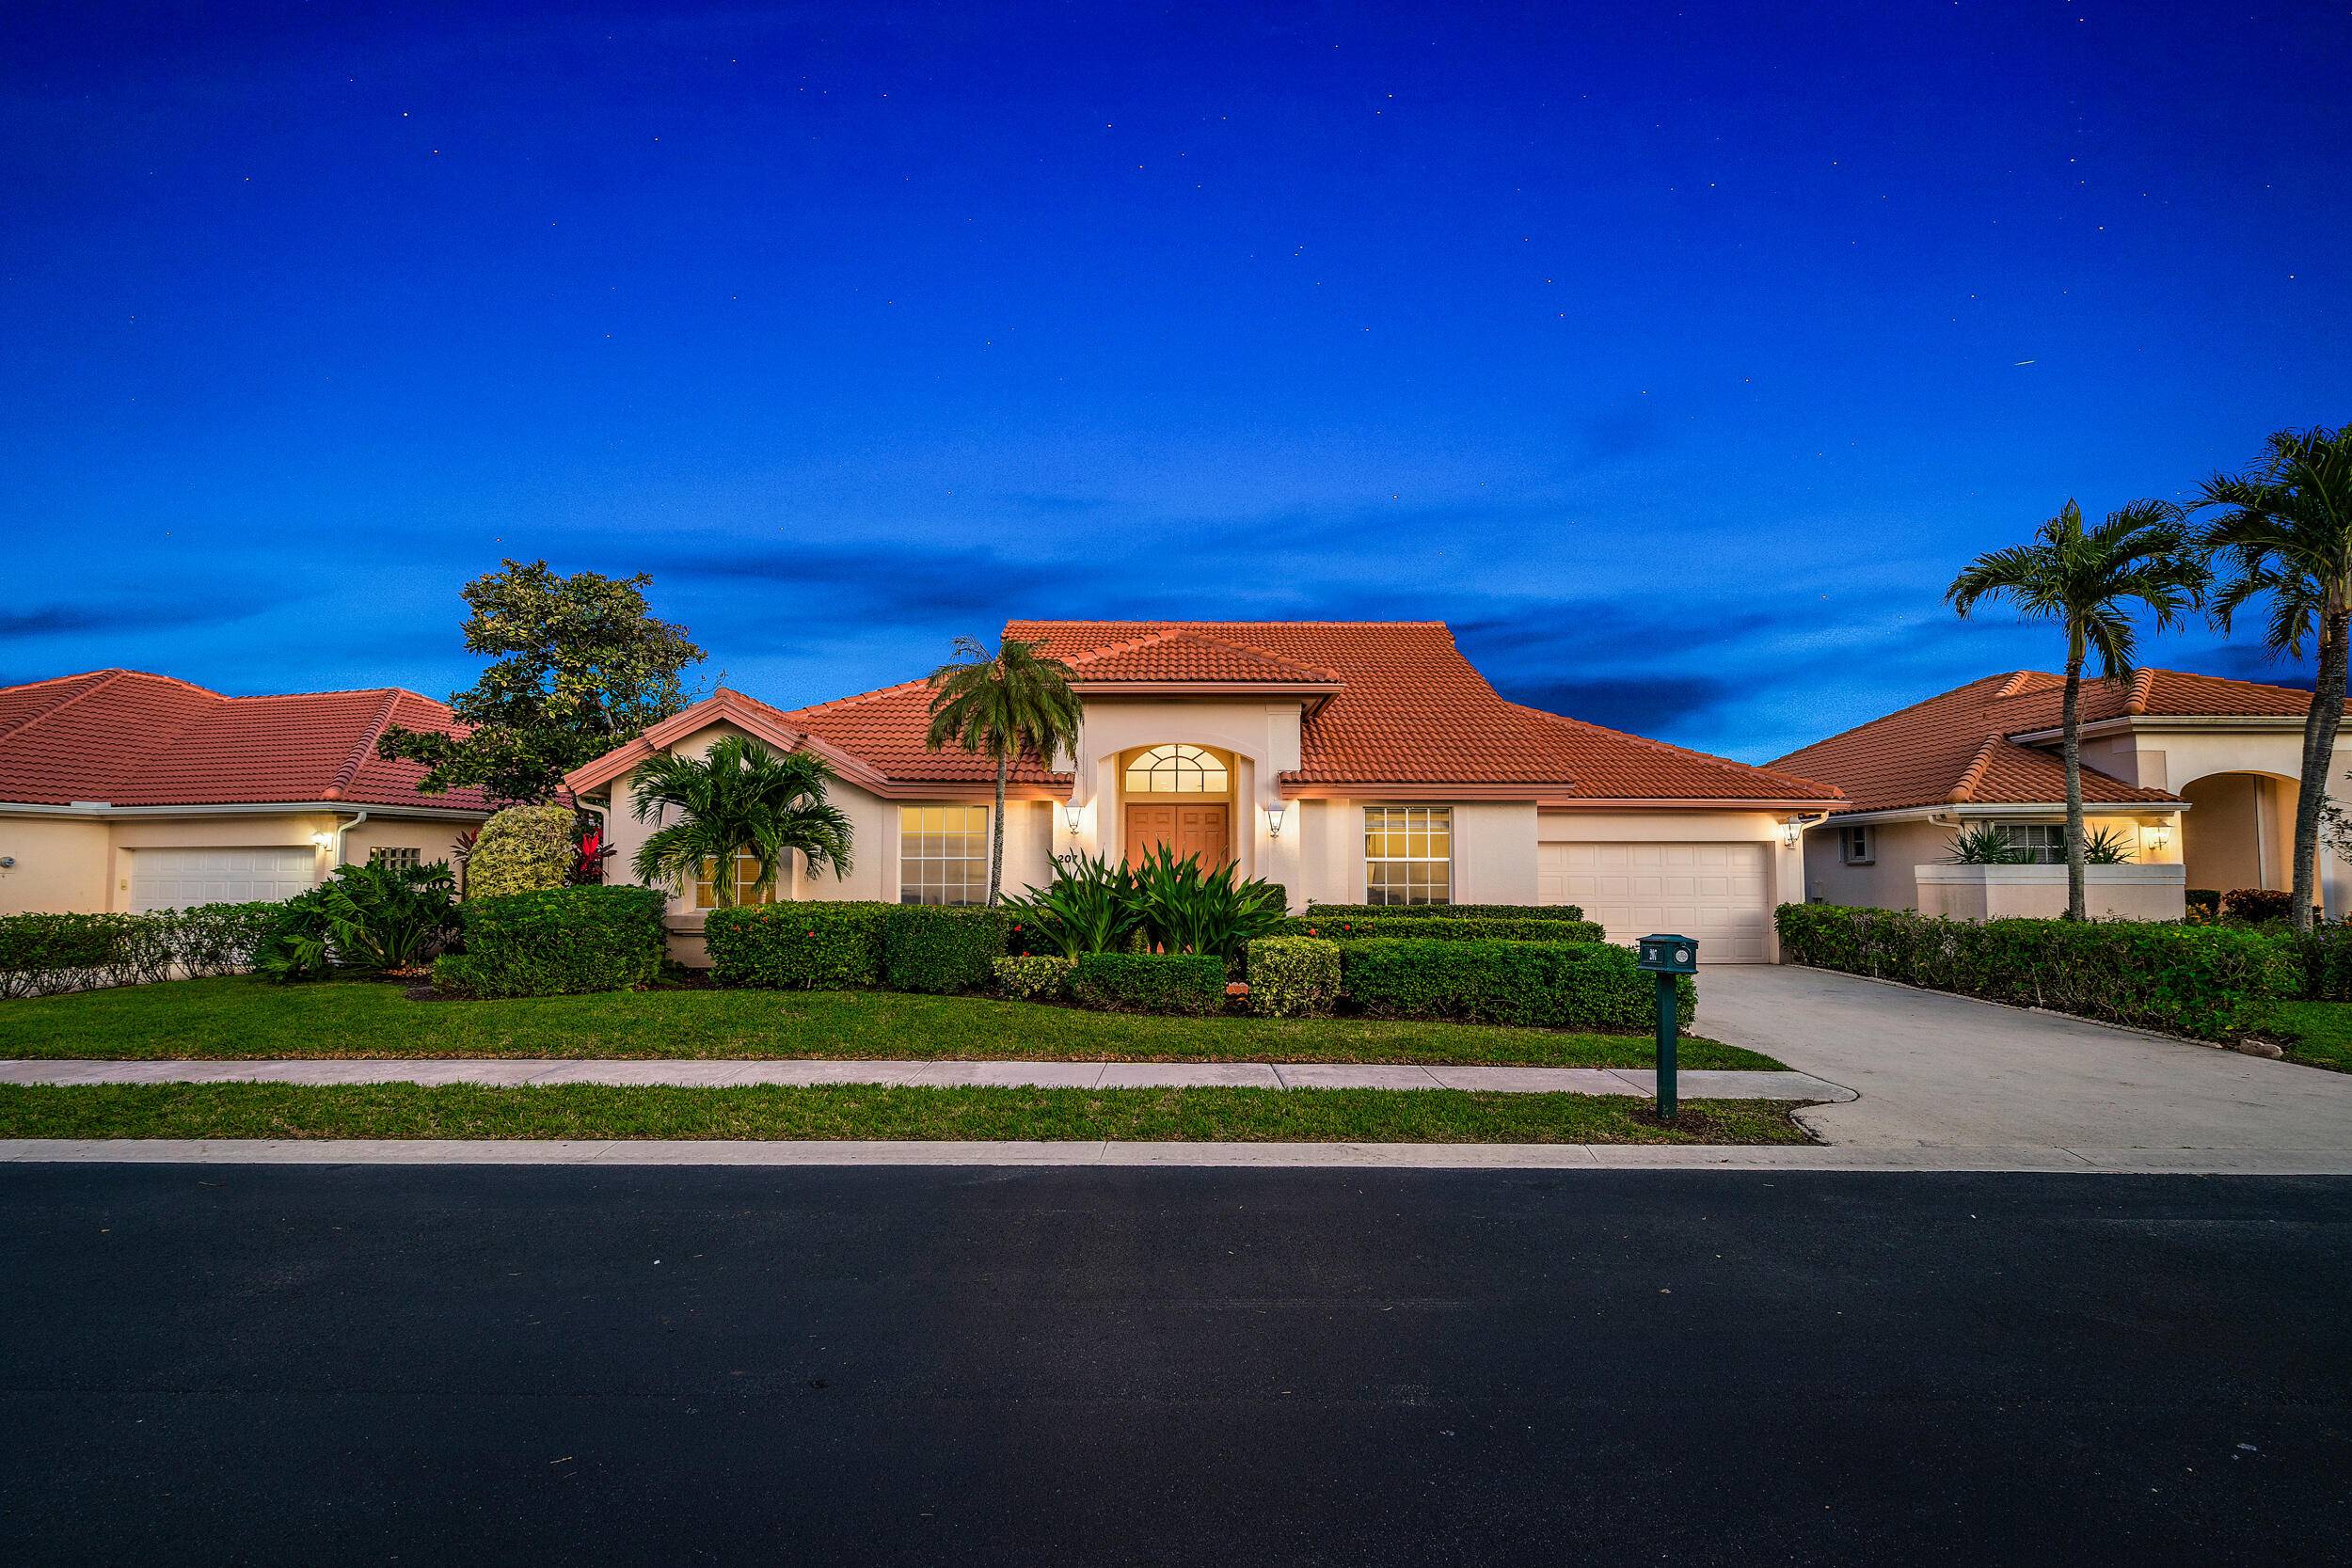 This fully furnished, turnkey, PGA NATIONAL rental is just what you've been DREAMING of.